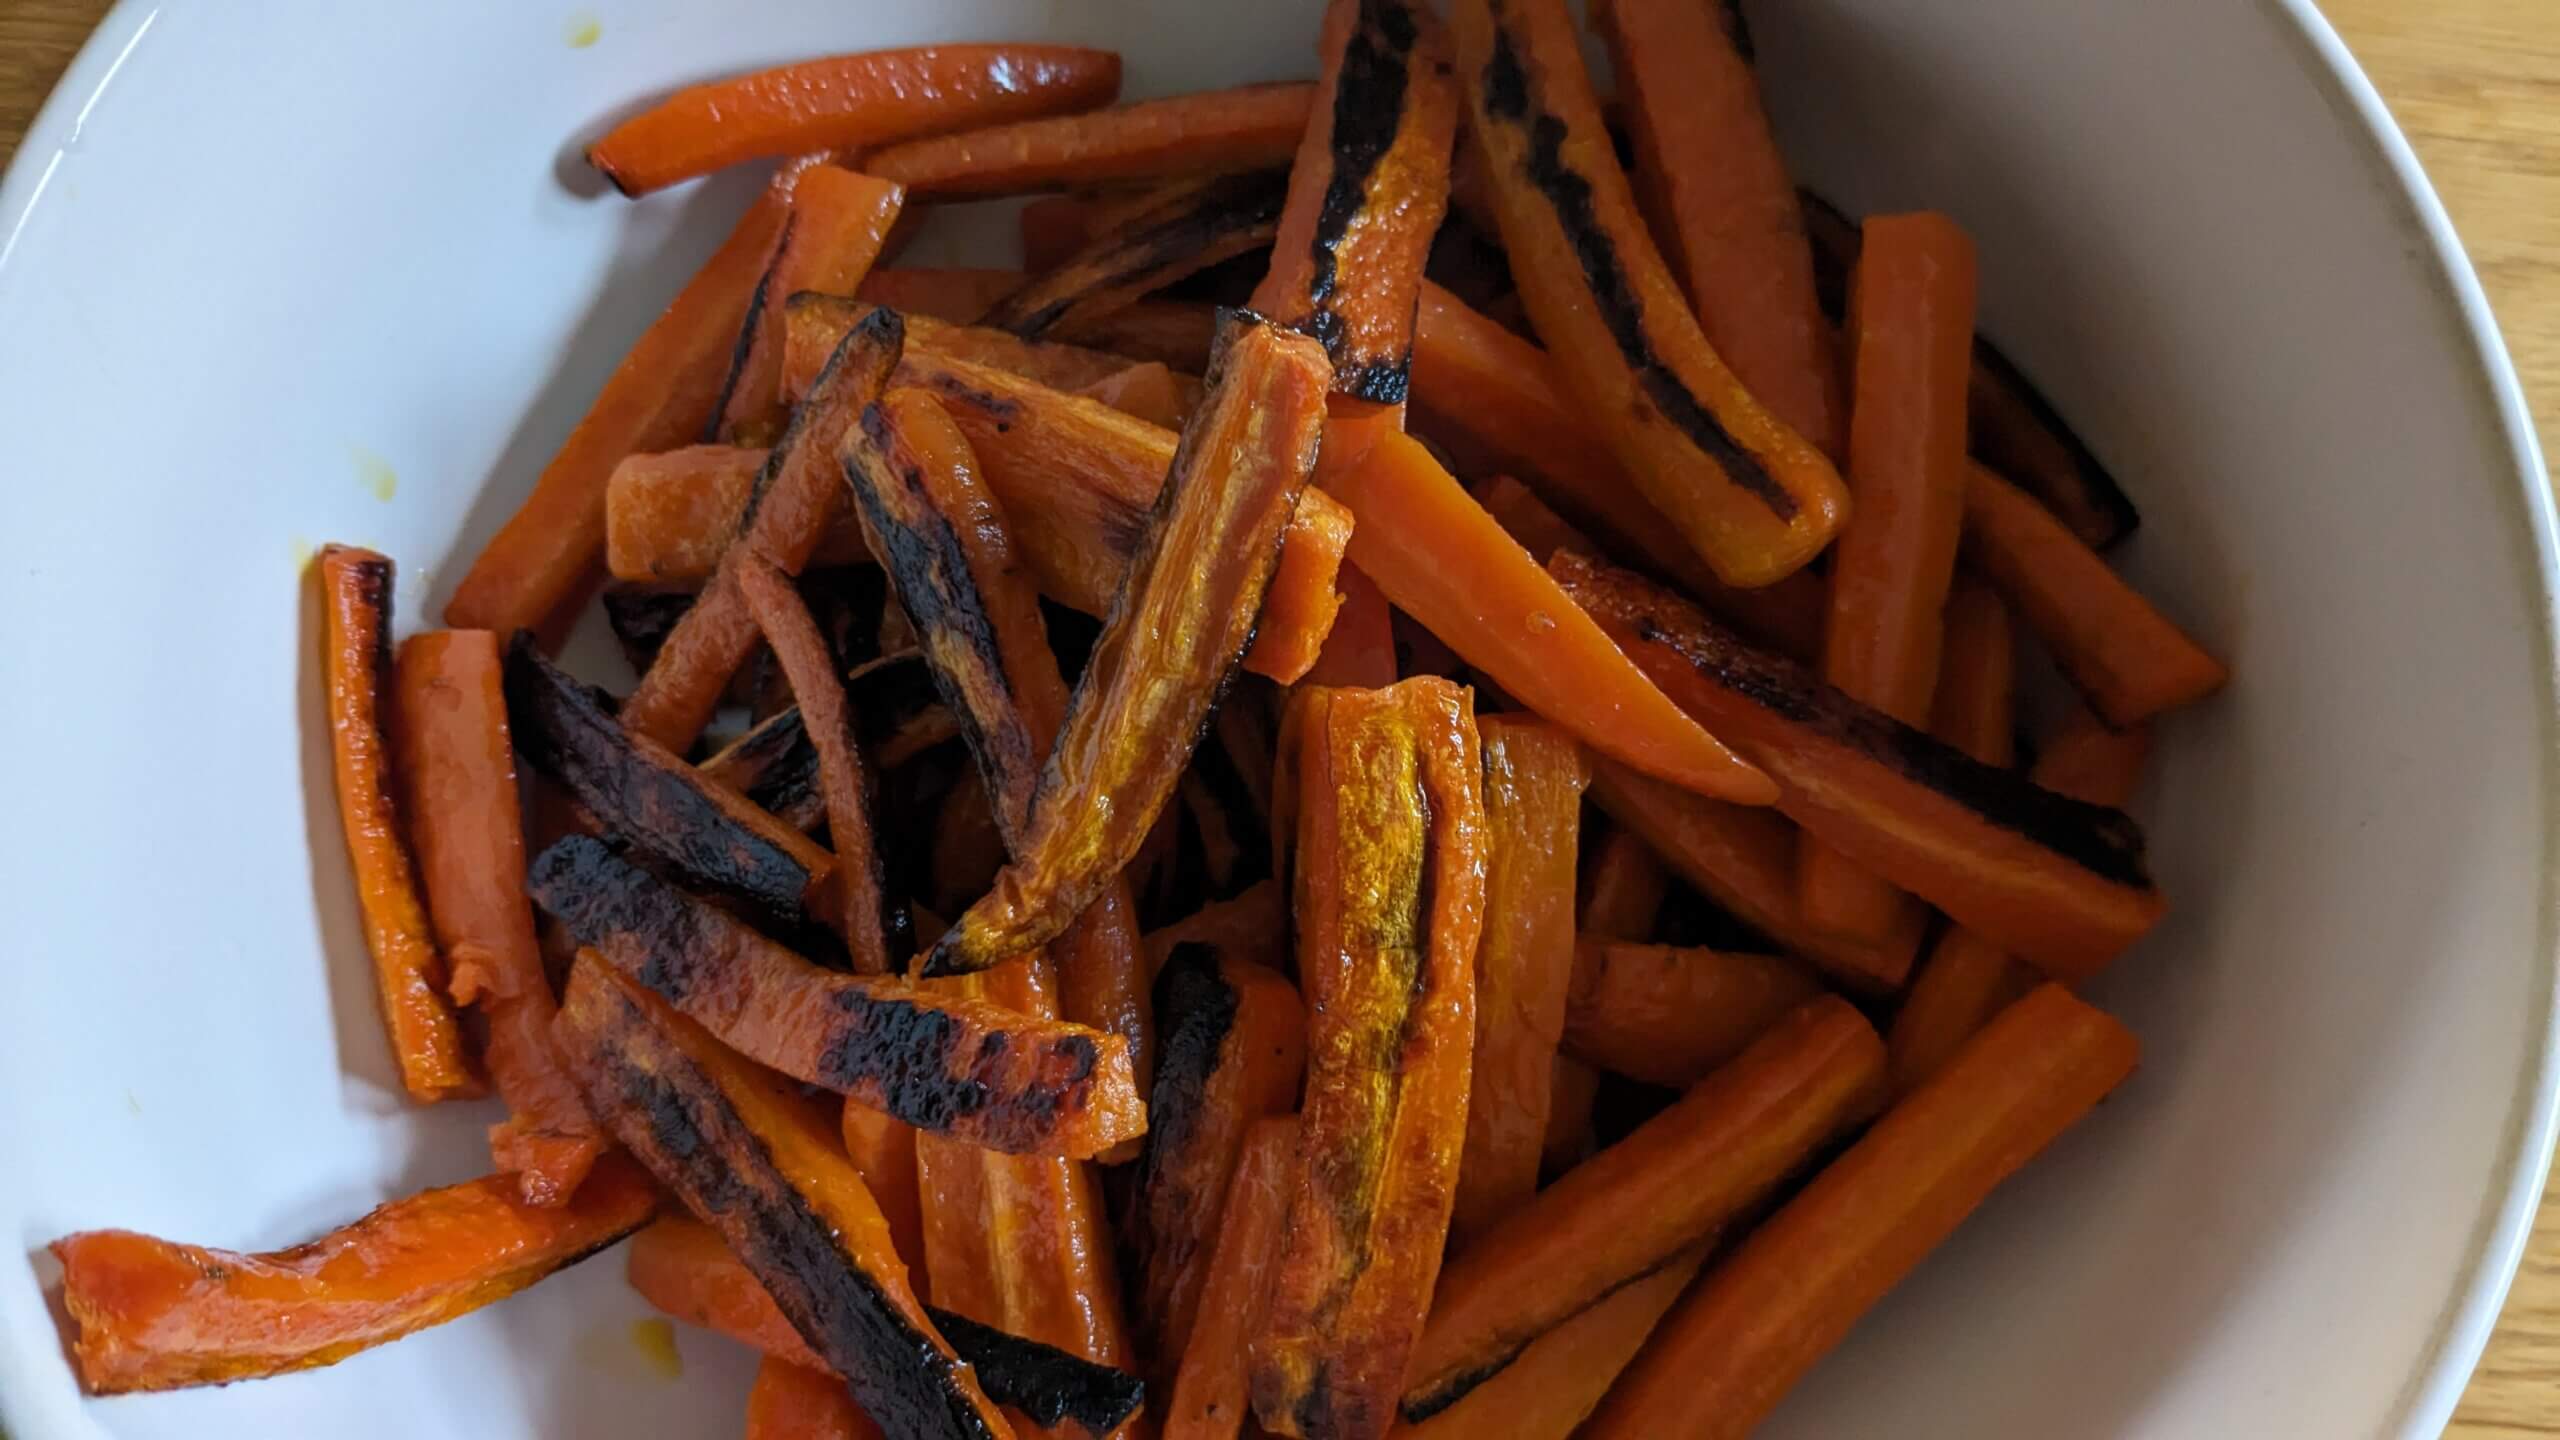 Crispy, Oven Roasted Carrot Fries and Spicy Dipping Sauce